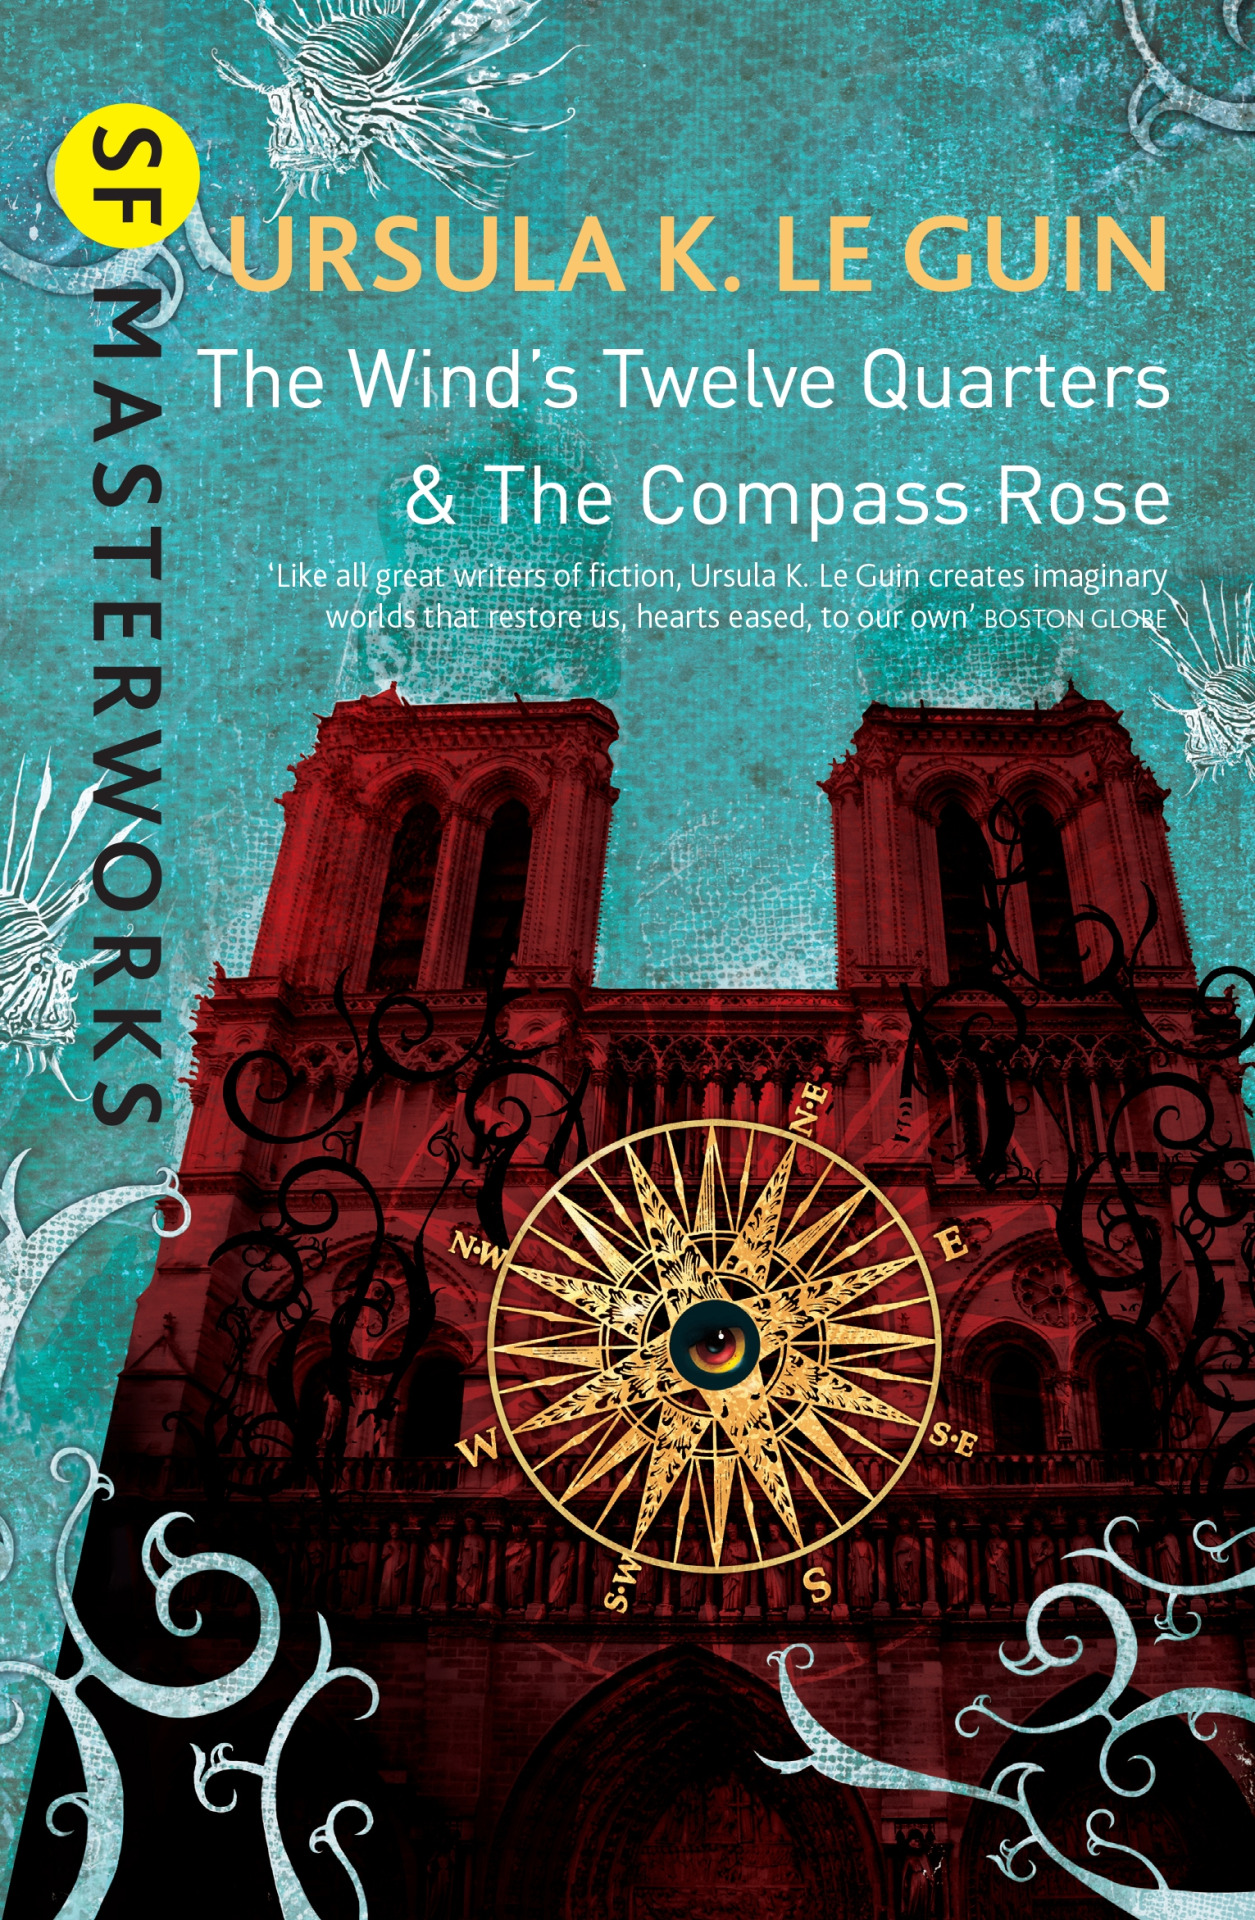 Started #reading The Wind’s Twelve Quarters and The Compass Rose by Ursula Le Guin.